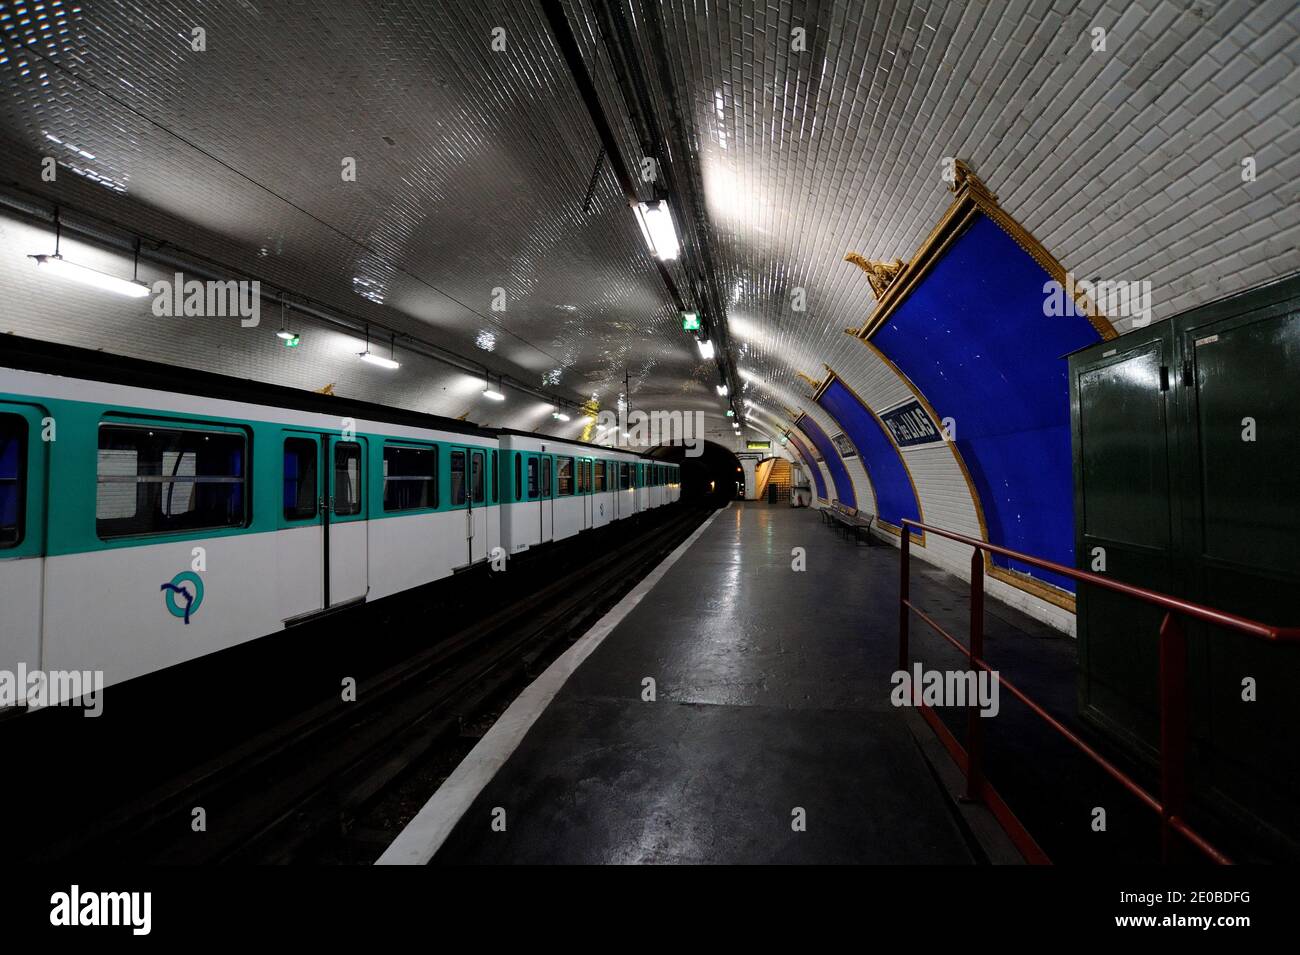 Visit of the closed Metro Station called, Porte des Lilas Cinema during the  operation 'Paris Face Cachee' where Parisians were allowed to visit secret  or unknowed parts of Paris underground. This abandonned